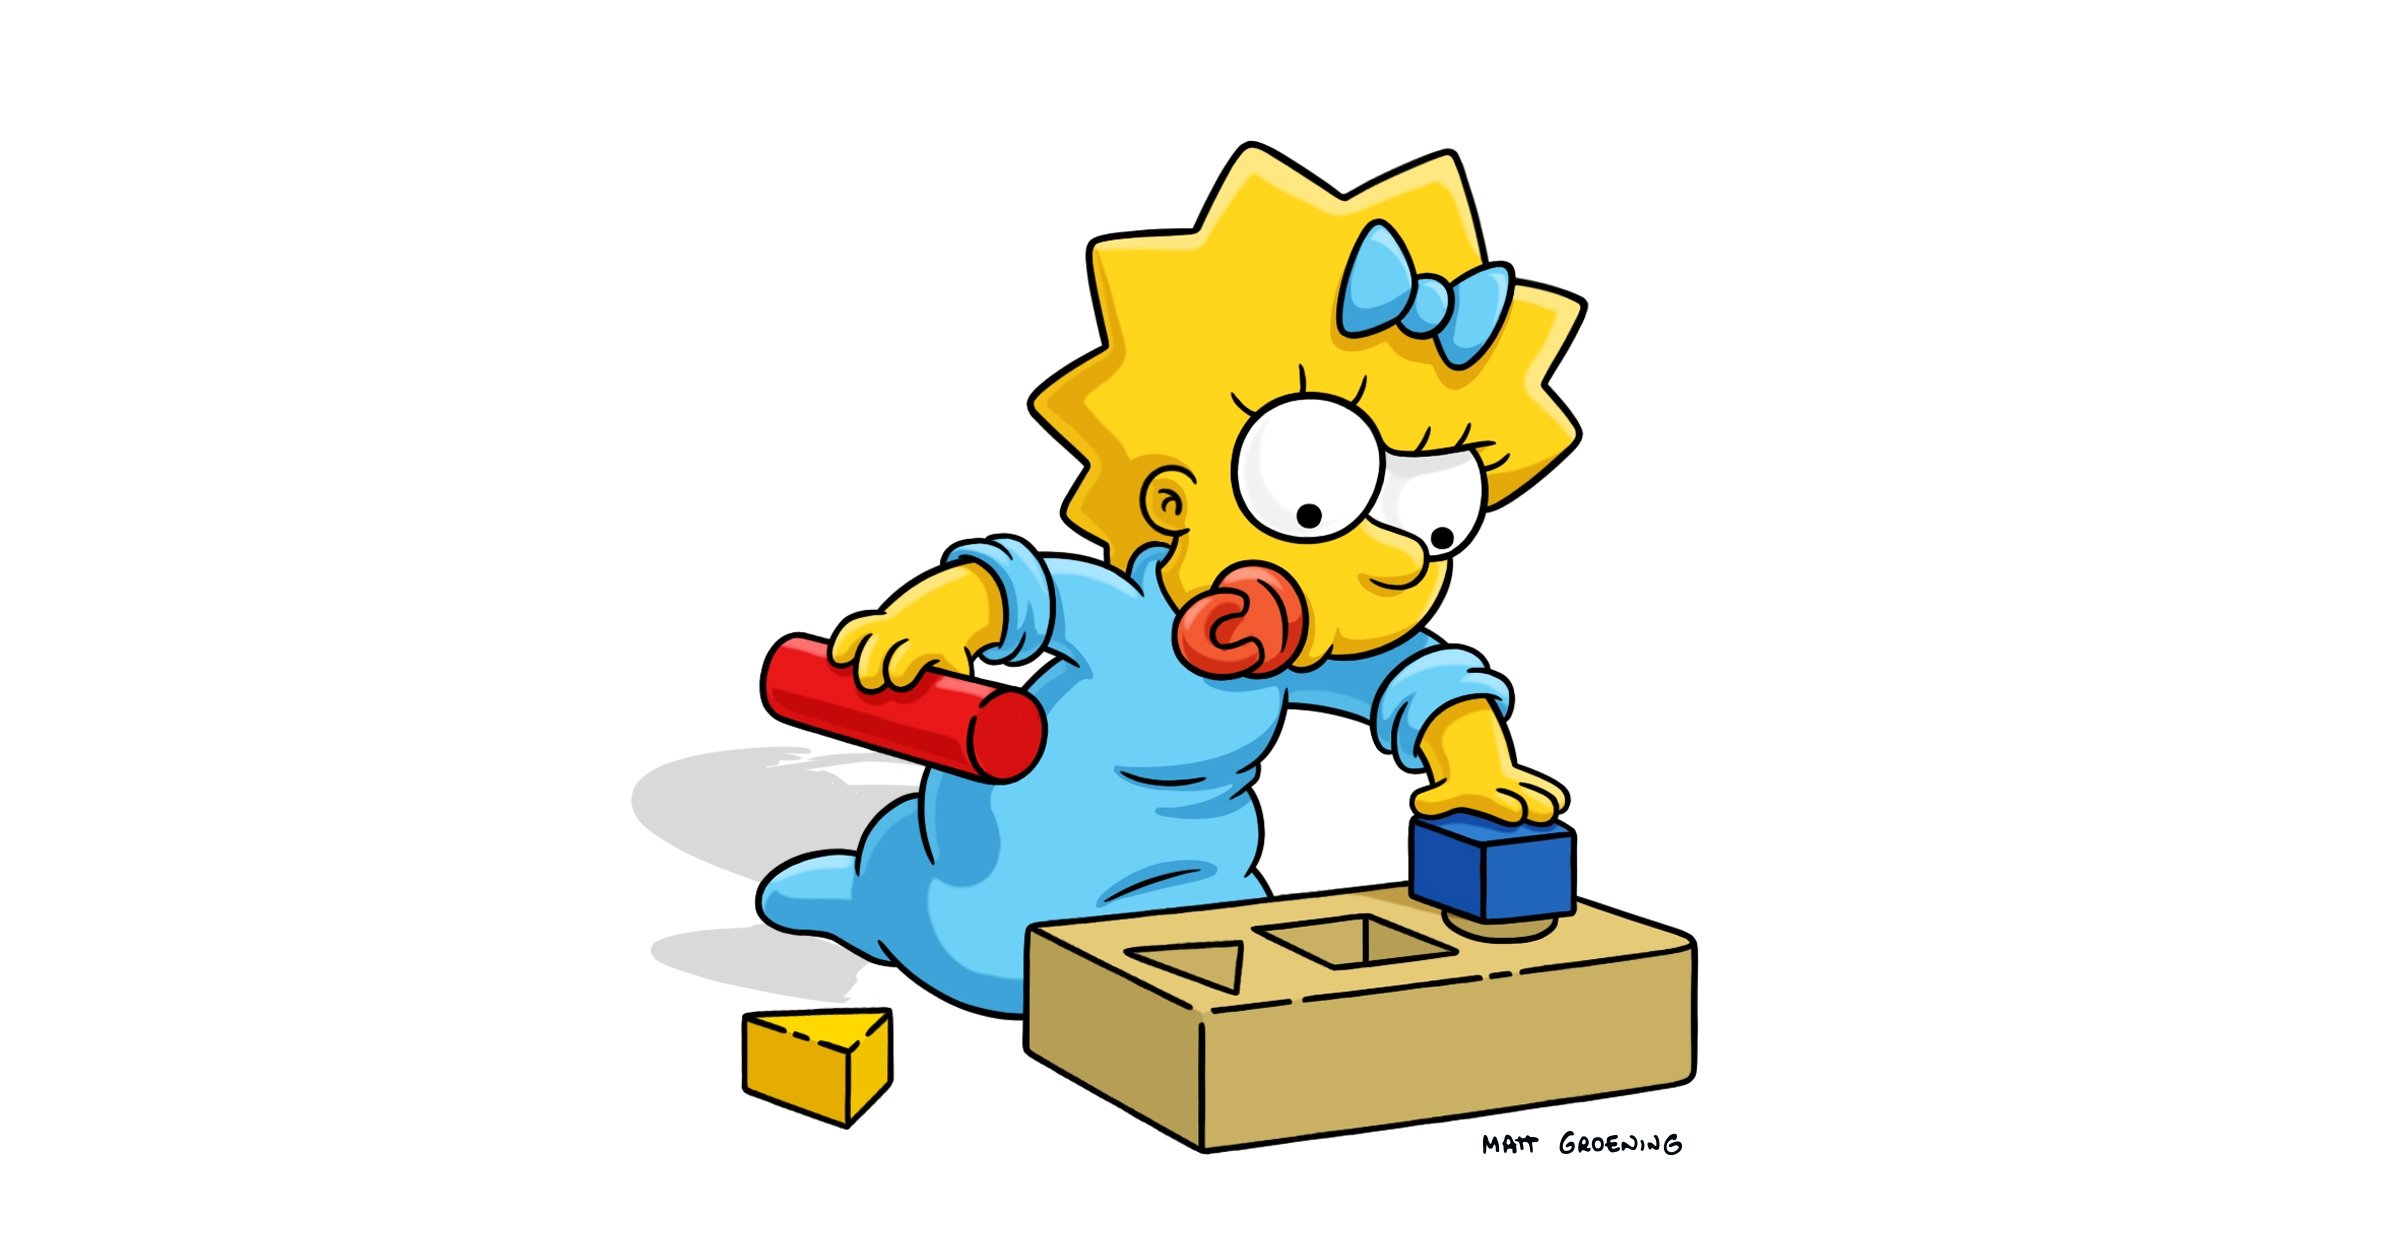 The Simpsons baby Maggie plays with blocks